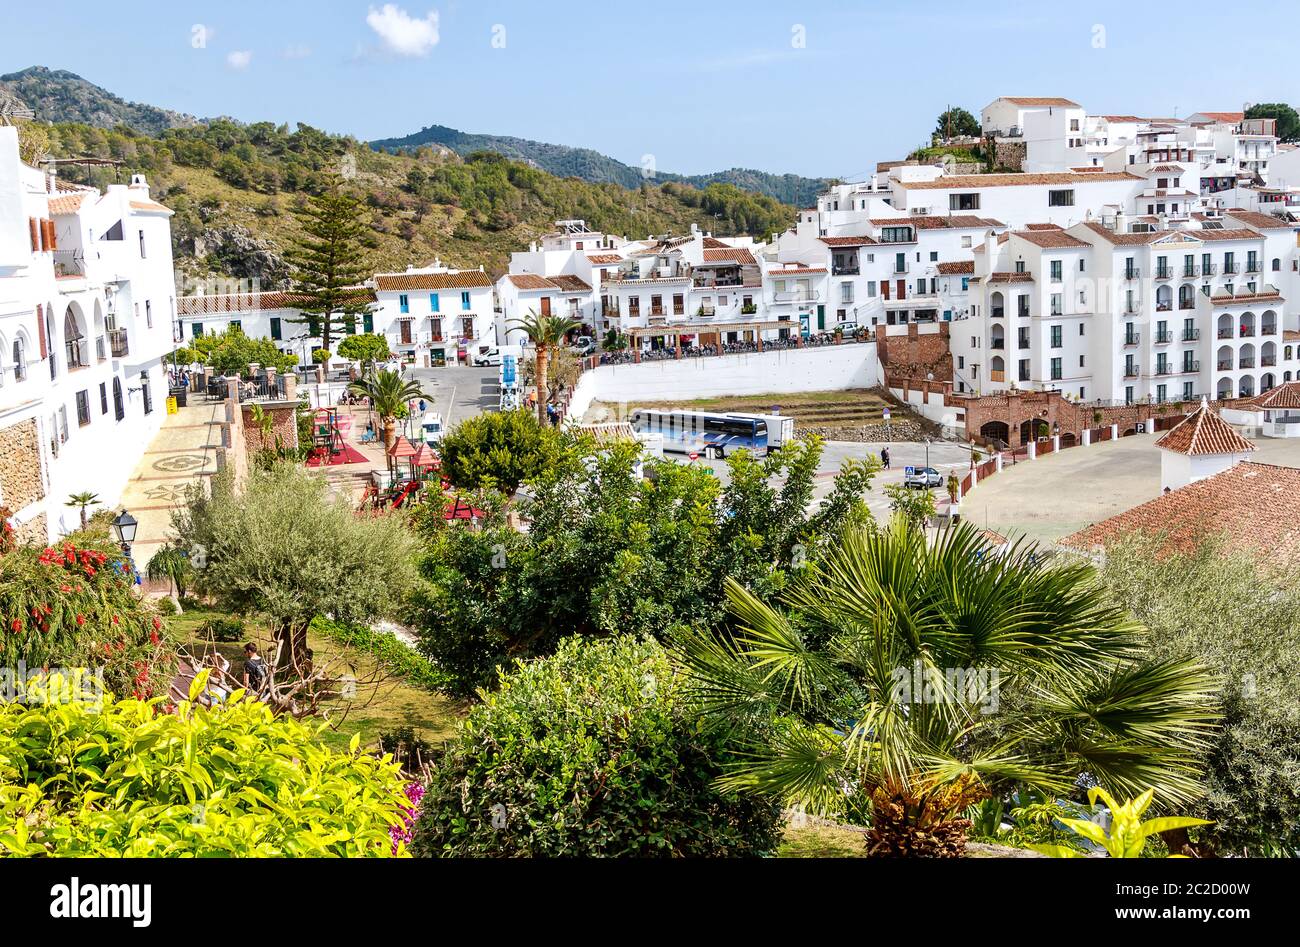 The picturesque white walled village of Frigiliana pueblo blanco above Nerja on the Costa del Sol in Southern Spain Stock Photo